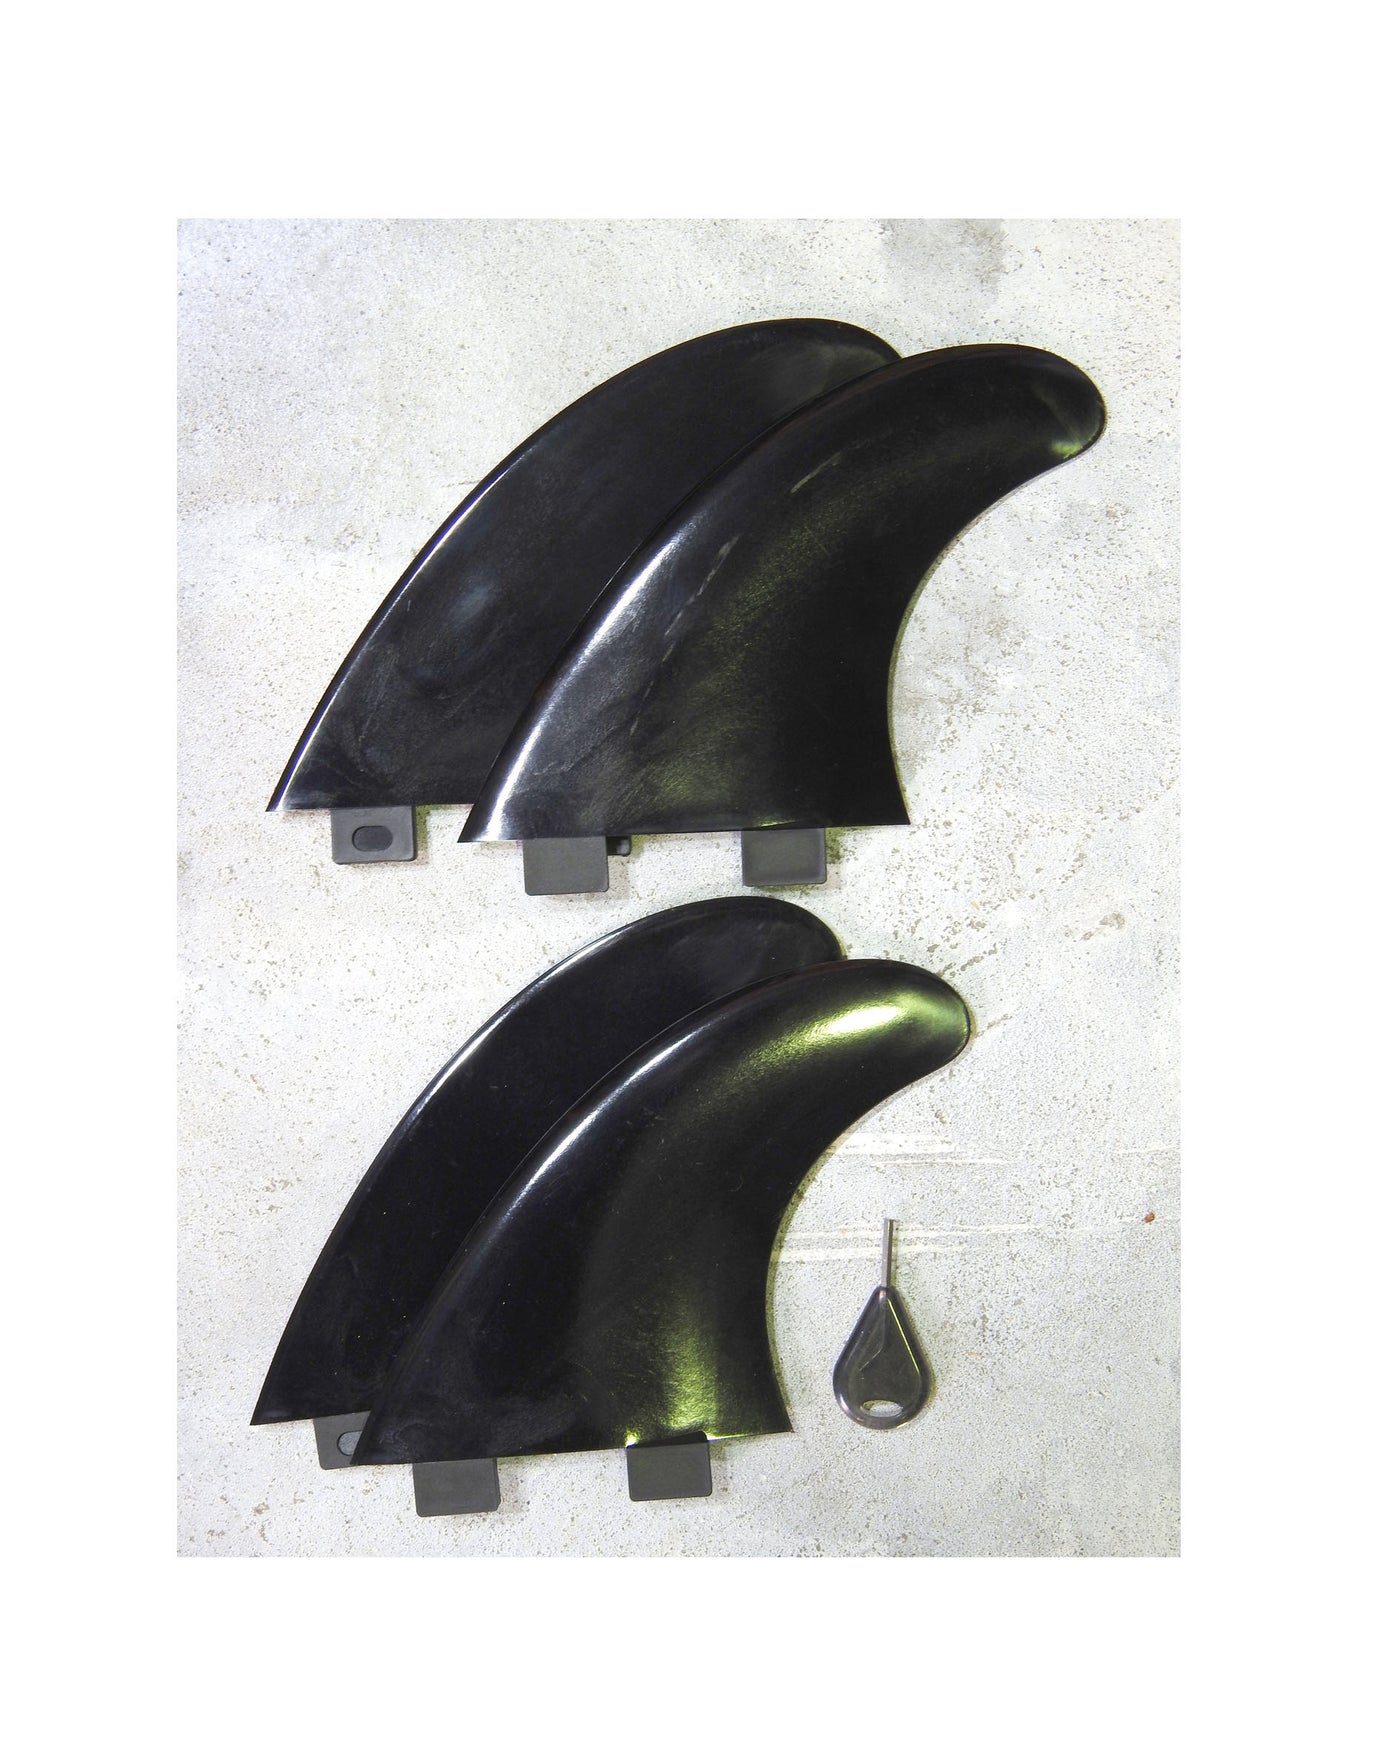 Alleydesigns Fin set 5 pce Center fin + 4 side fins (FREE SHIPPING) - Alleydesigns  Pty Ltd                                             ABN: 44165571264